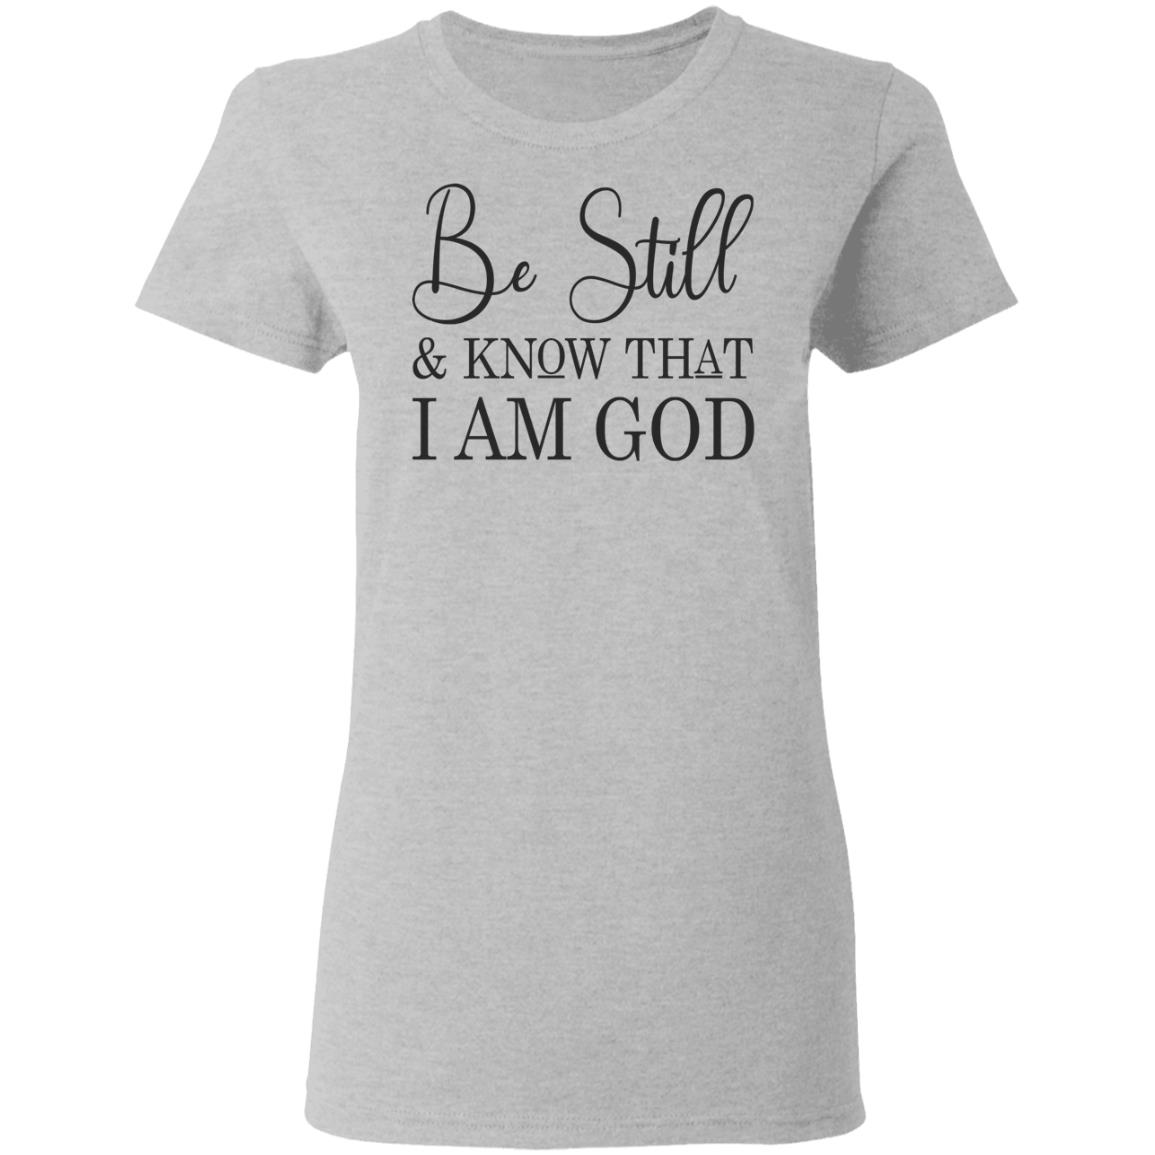 Be Still And Know That I Am God Shirt | Allbluetees.com